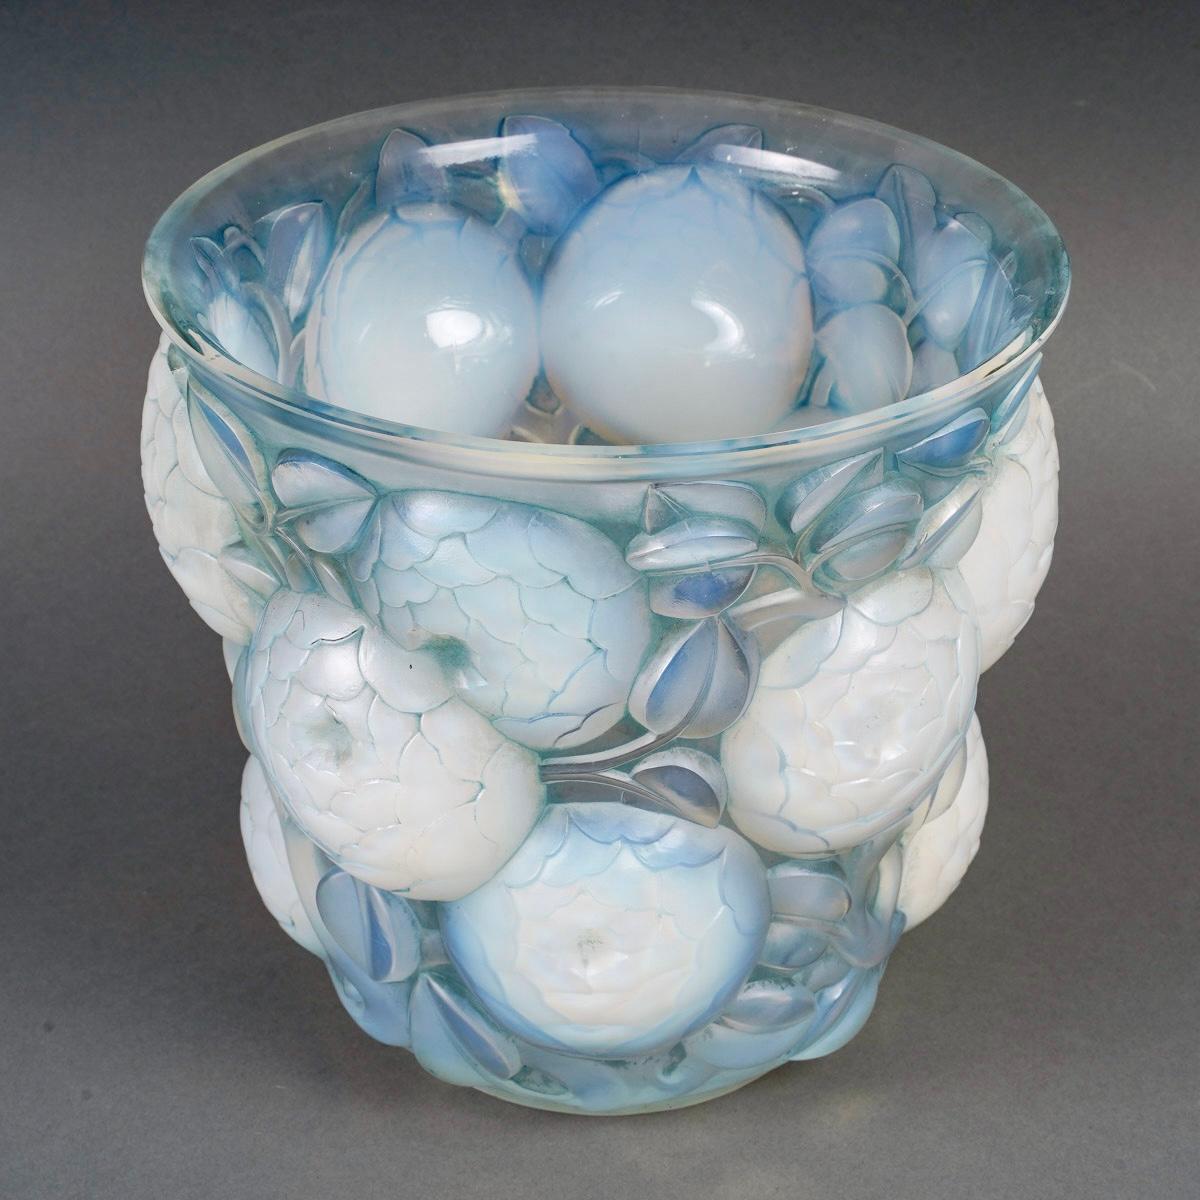 Art Deco 1927 Rene Lalique Vase Oran Opalescent Glass with Blue Patina For Sale